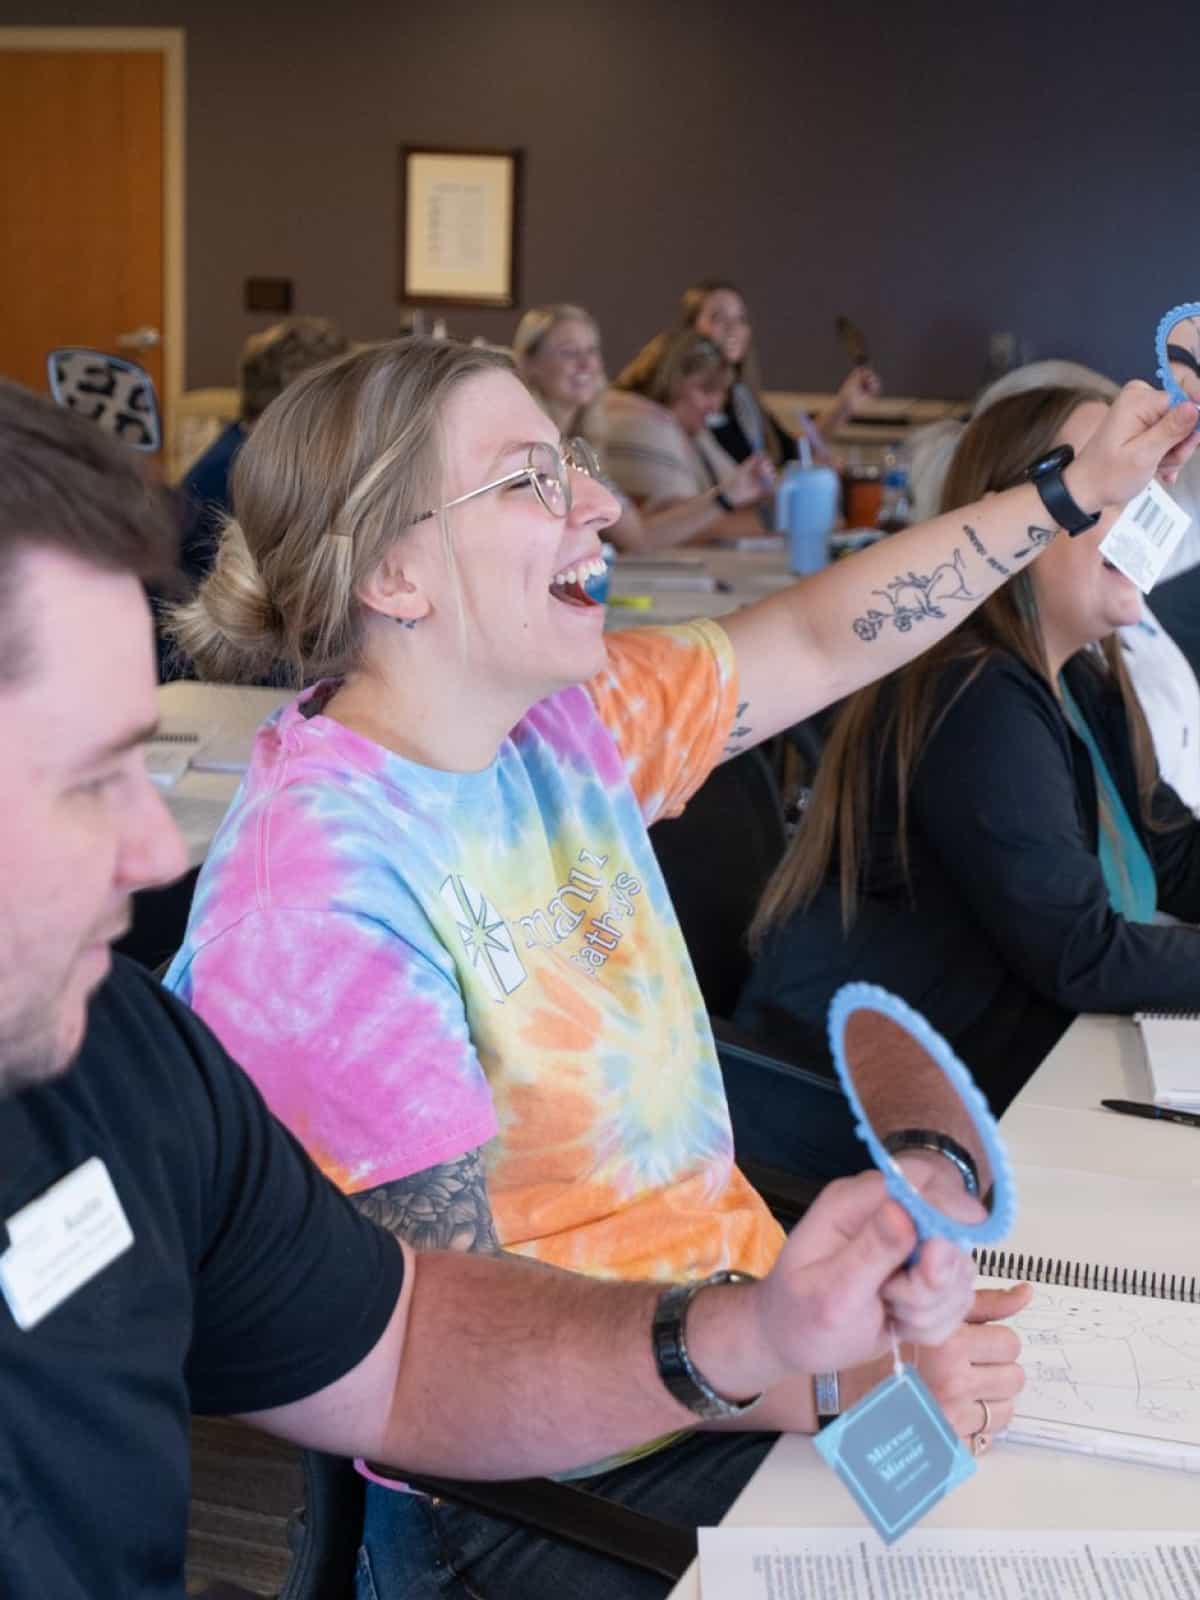 An Immanuel employee smiles and raise here hand during an employee training session.